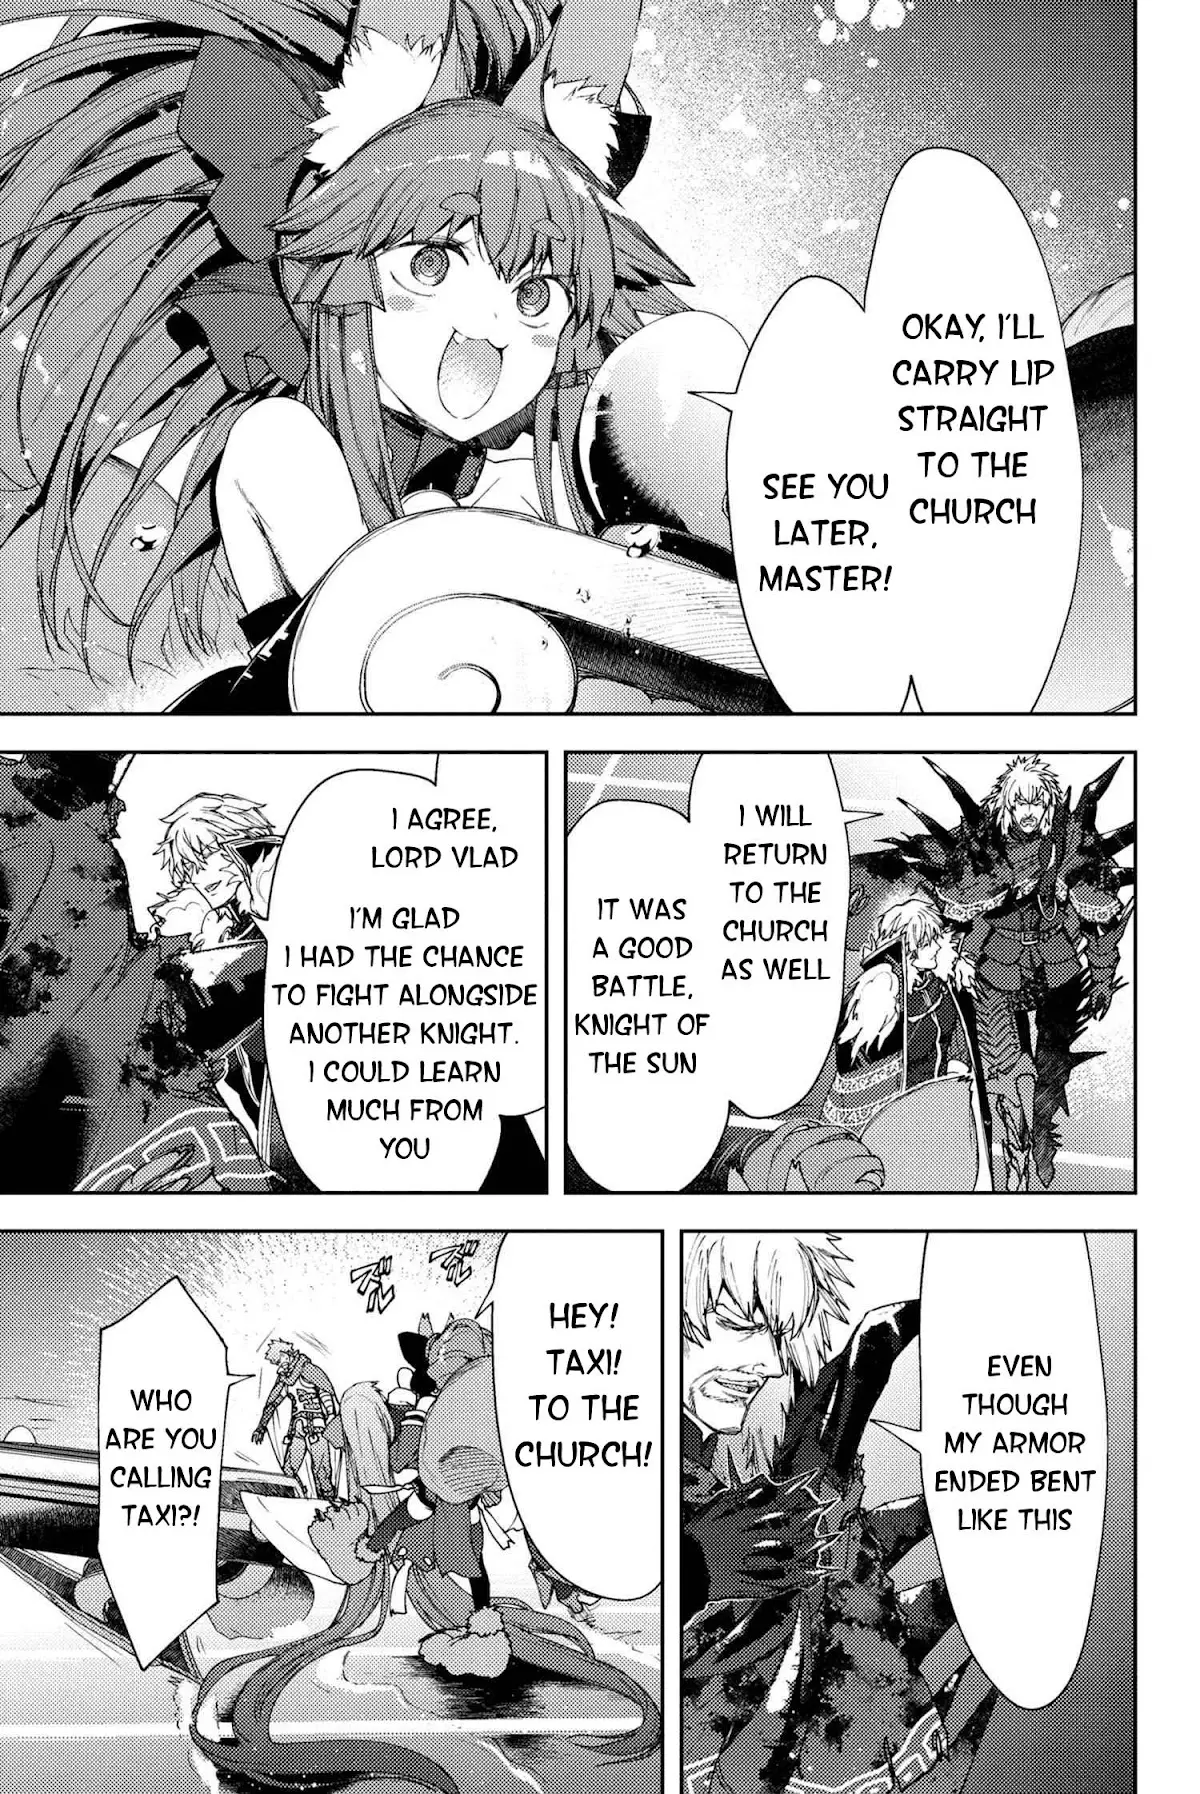 Fate/grand Order -Epic Of Remnant- Deep Sea Cyber-Paradise Se.ra.ph - 18.2 page 6-9aa0020e